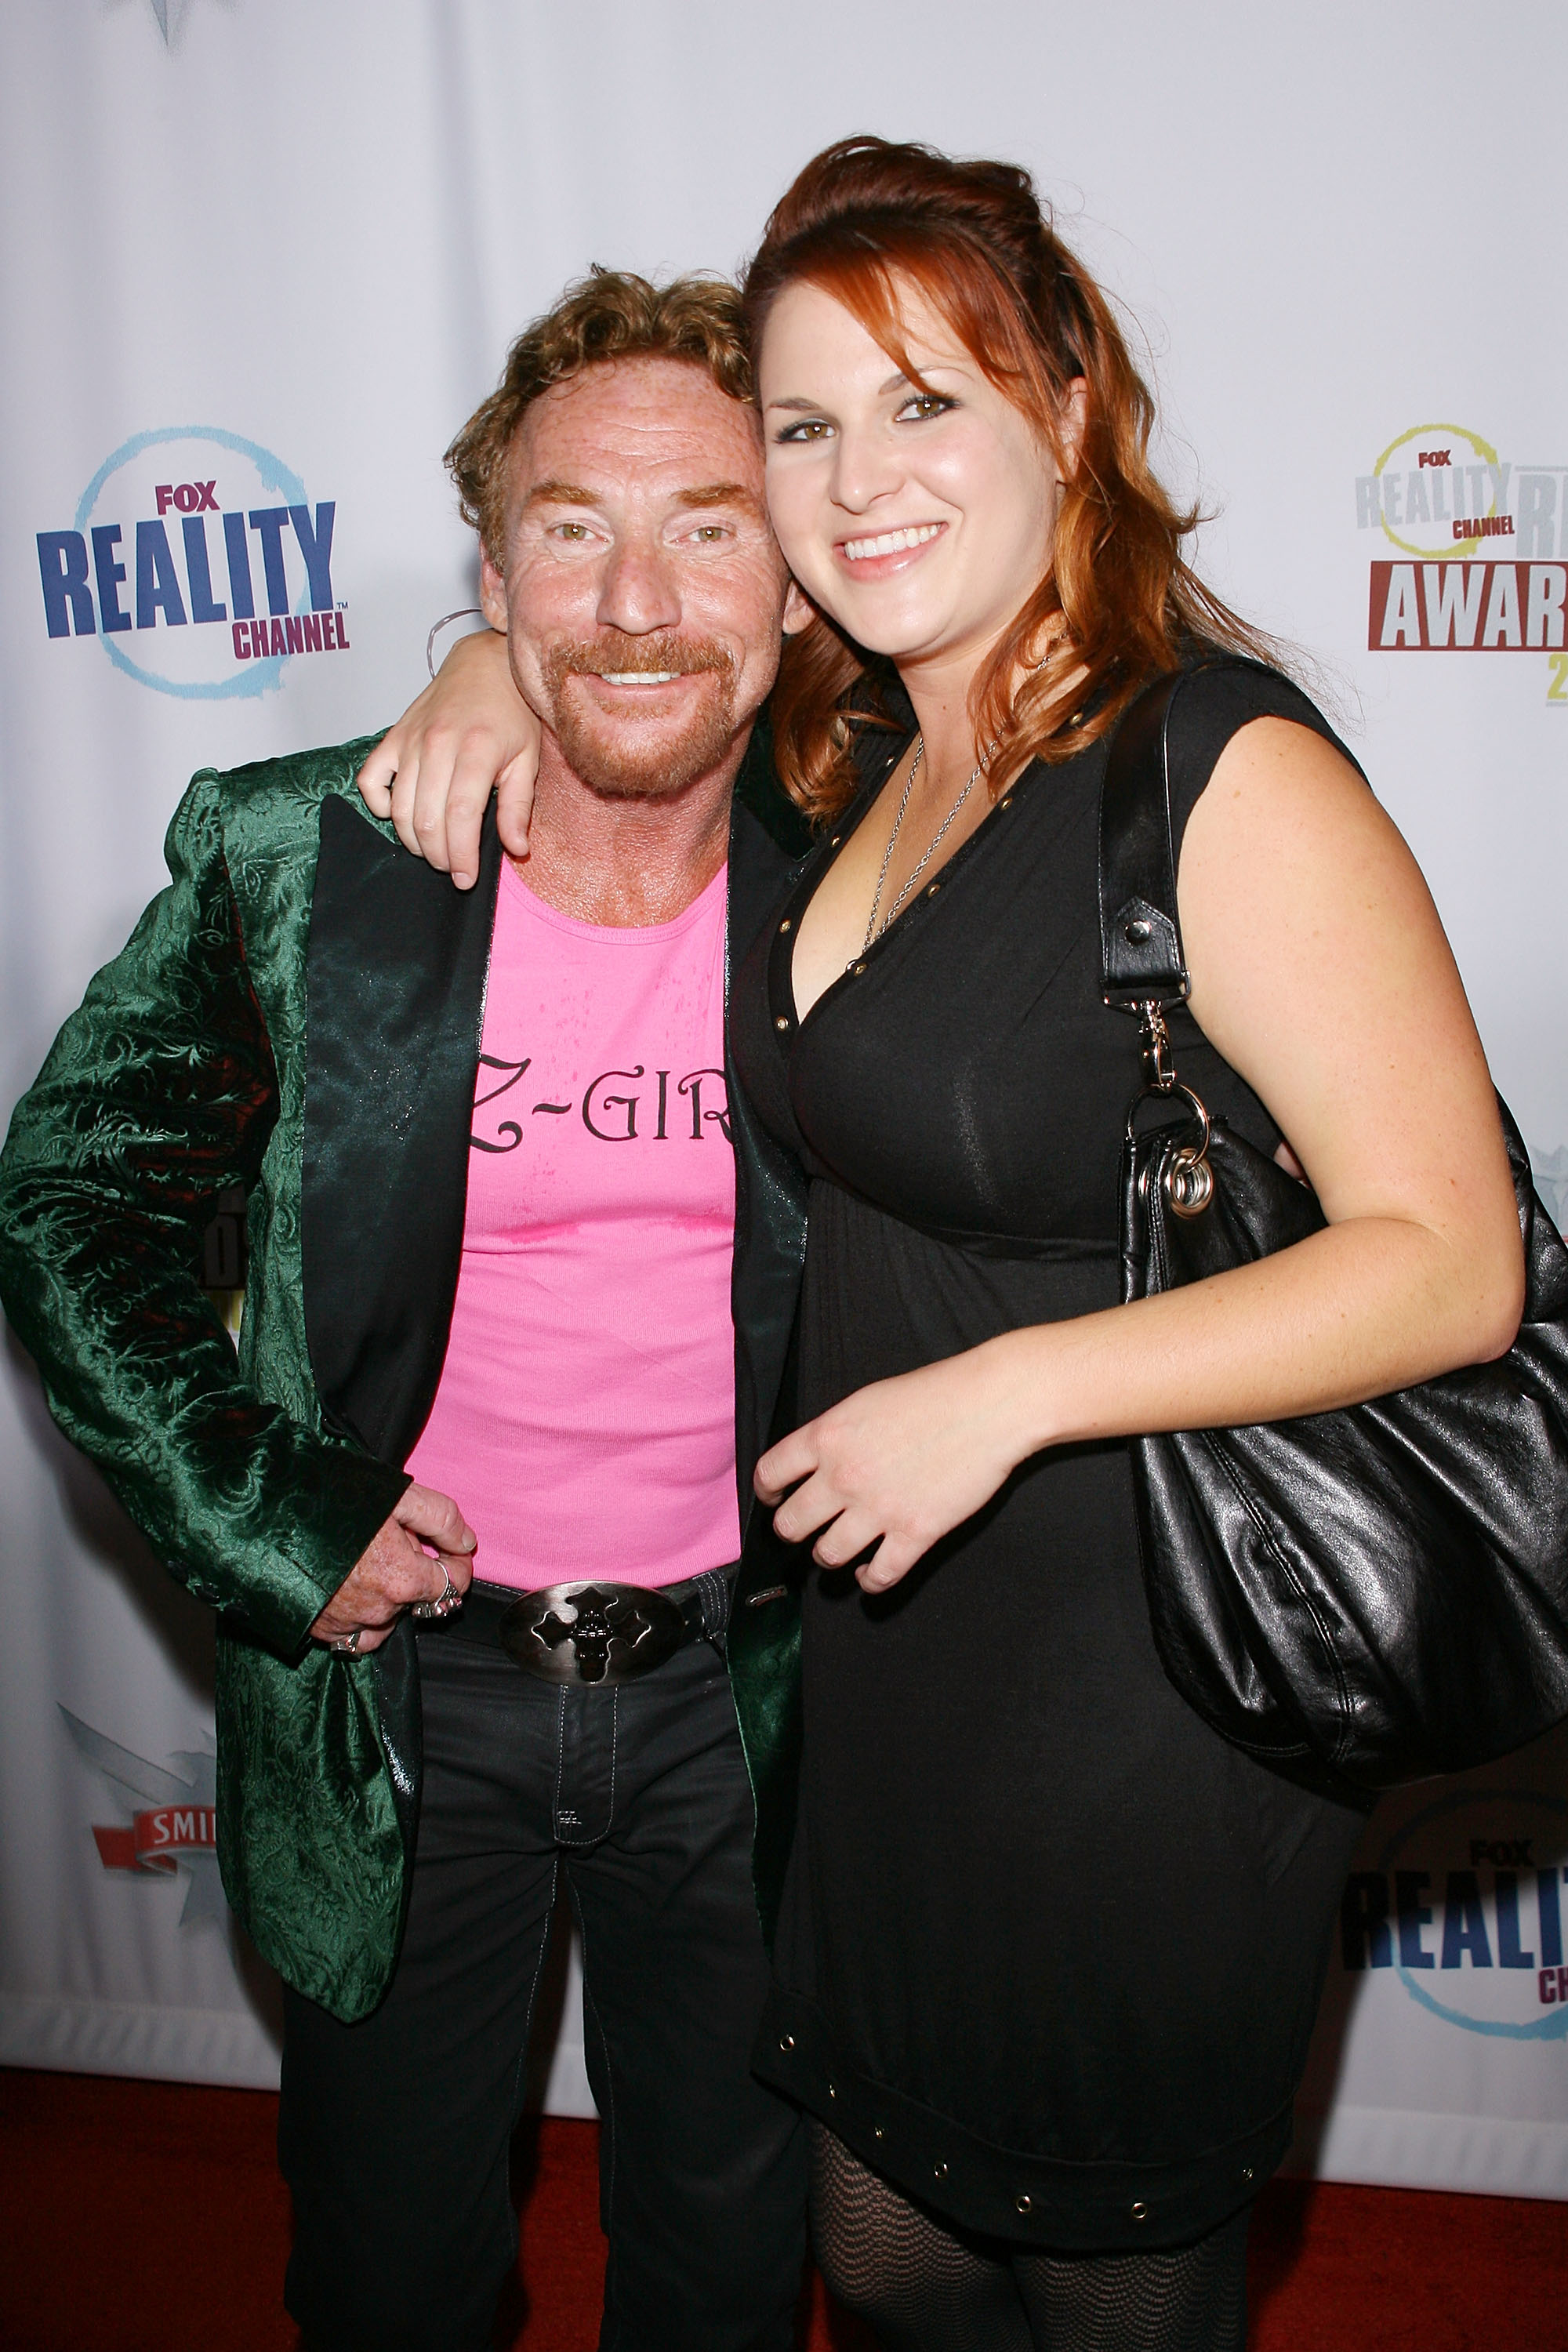 Danny Bonaduce and Amy Railsback arrive at the FOX Reality Channel "Really Awards" held at Avalon Nightclub on September 24, 2008, in Hollywood, California. | Source: Getty Images